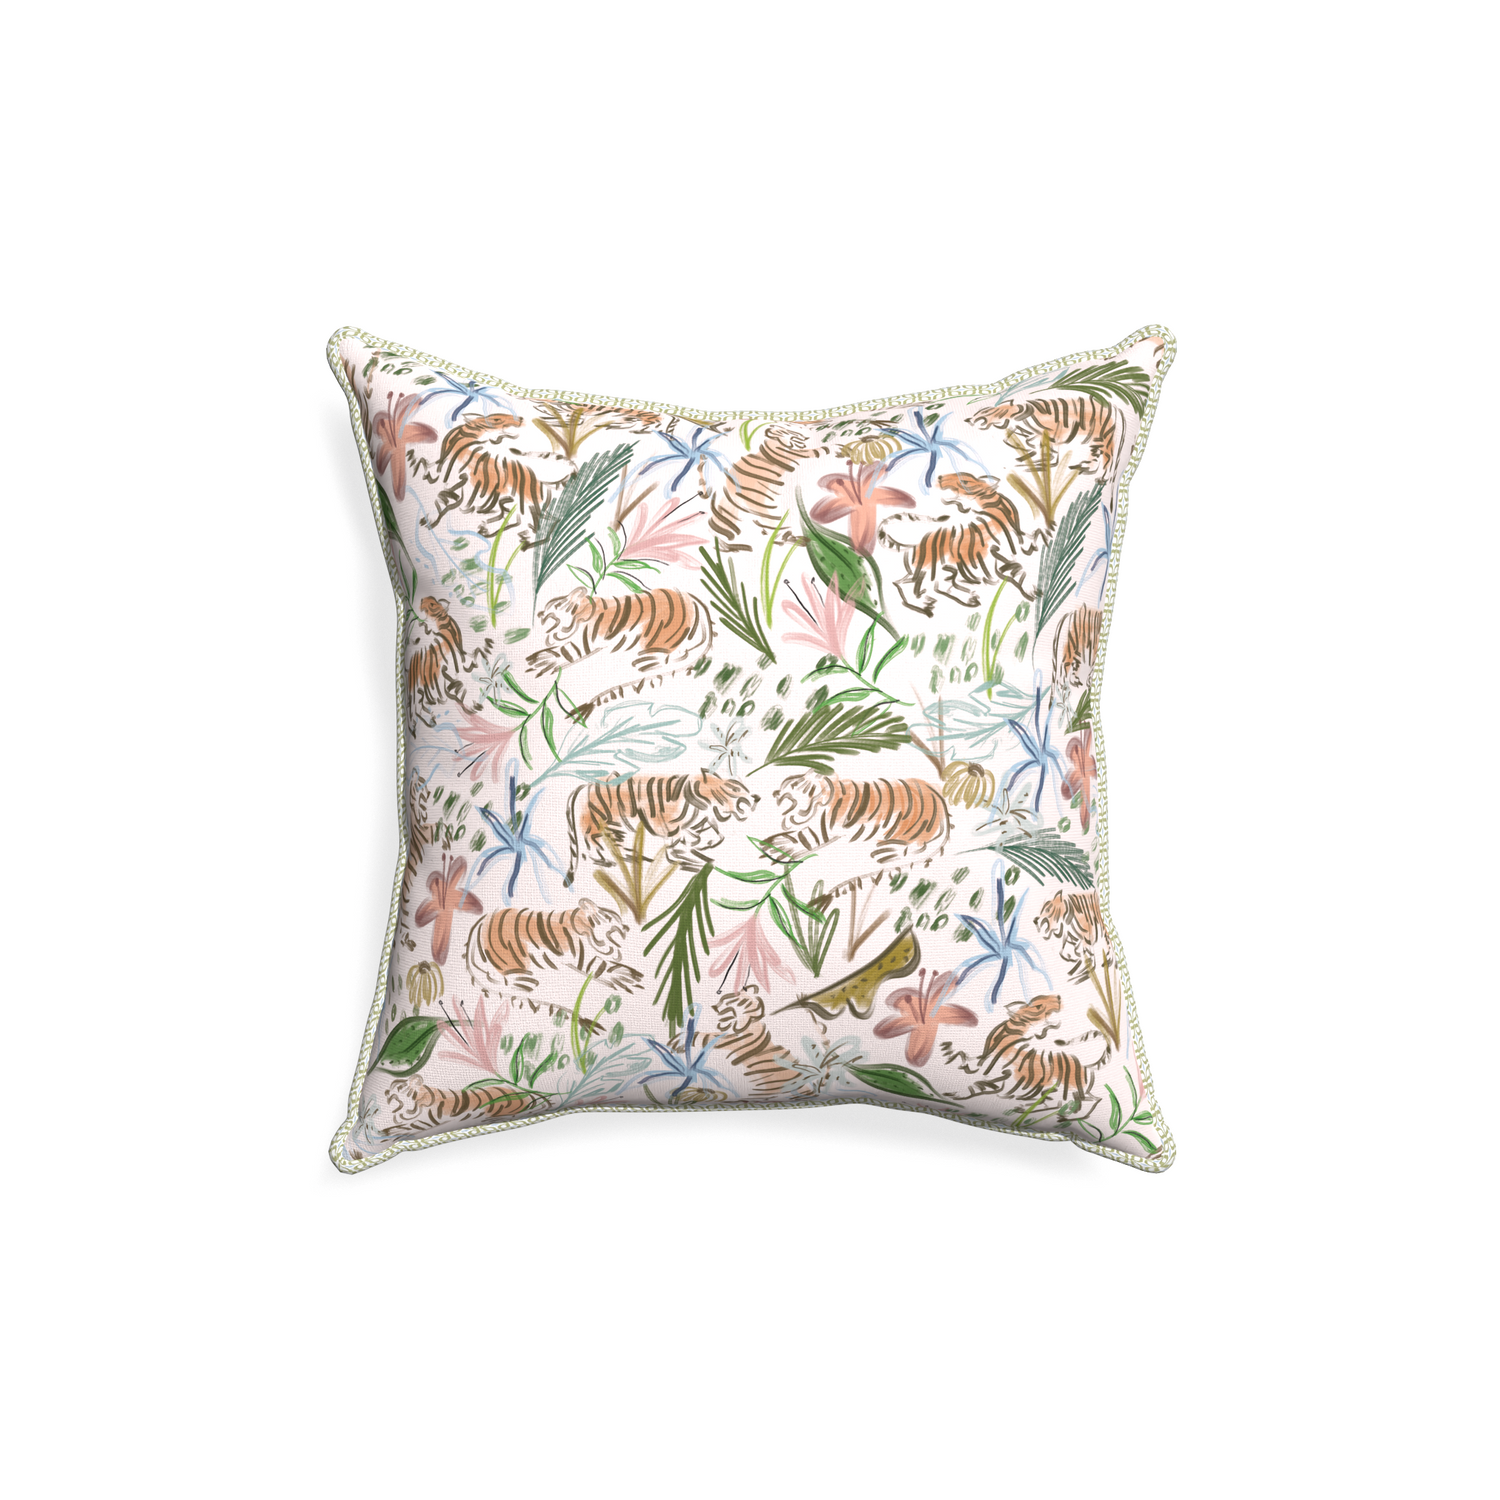 18-square frida pink custom pink chinoiserie tigerpillow with l piping on white background